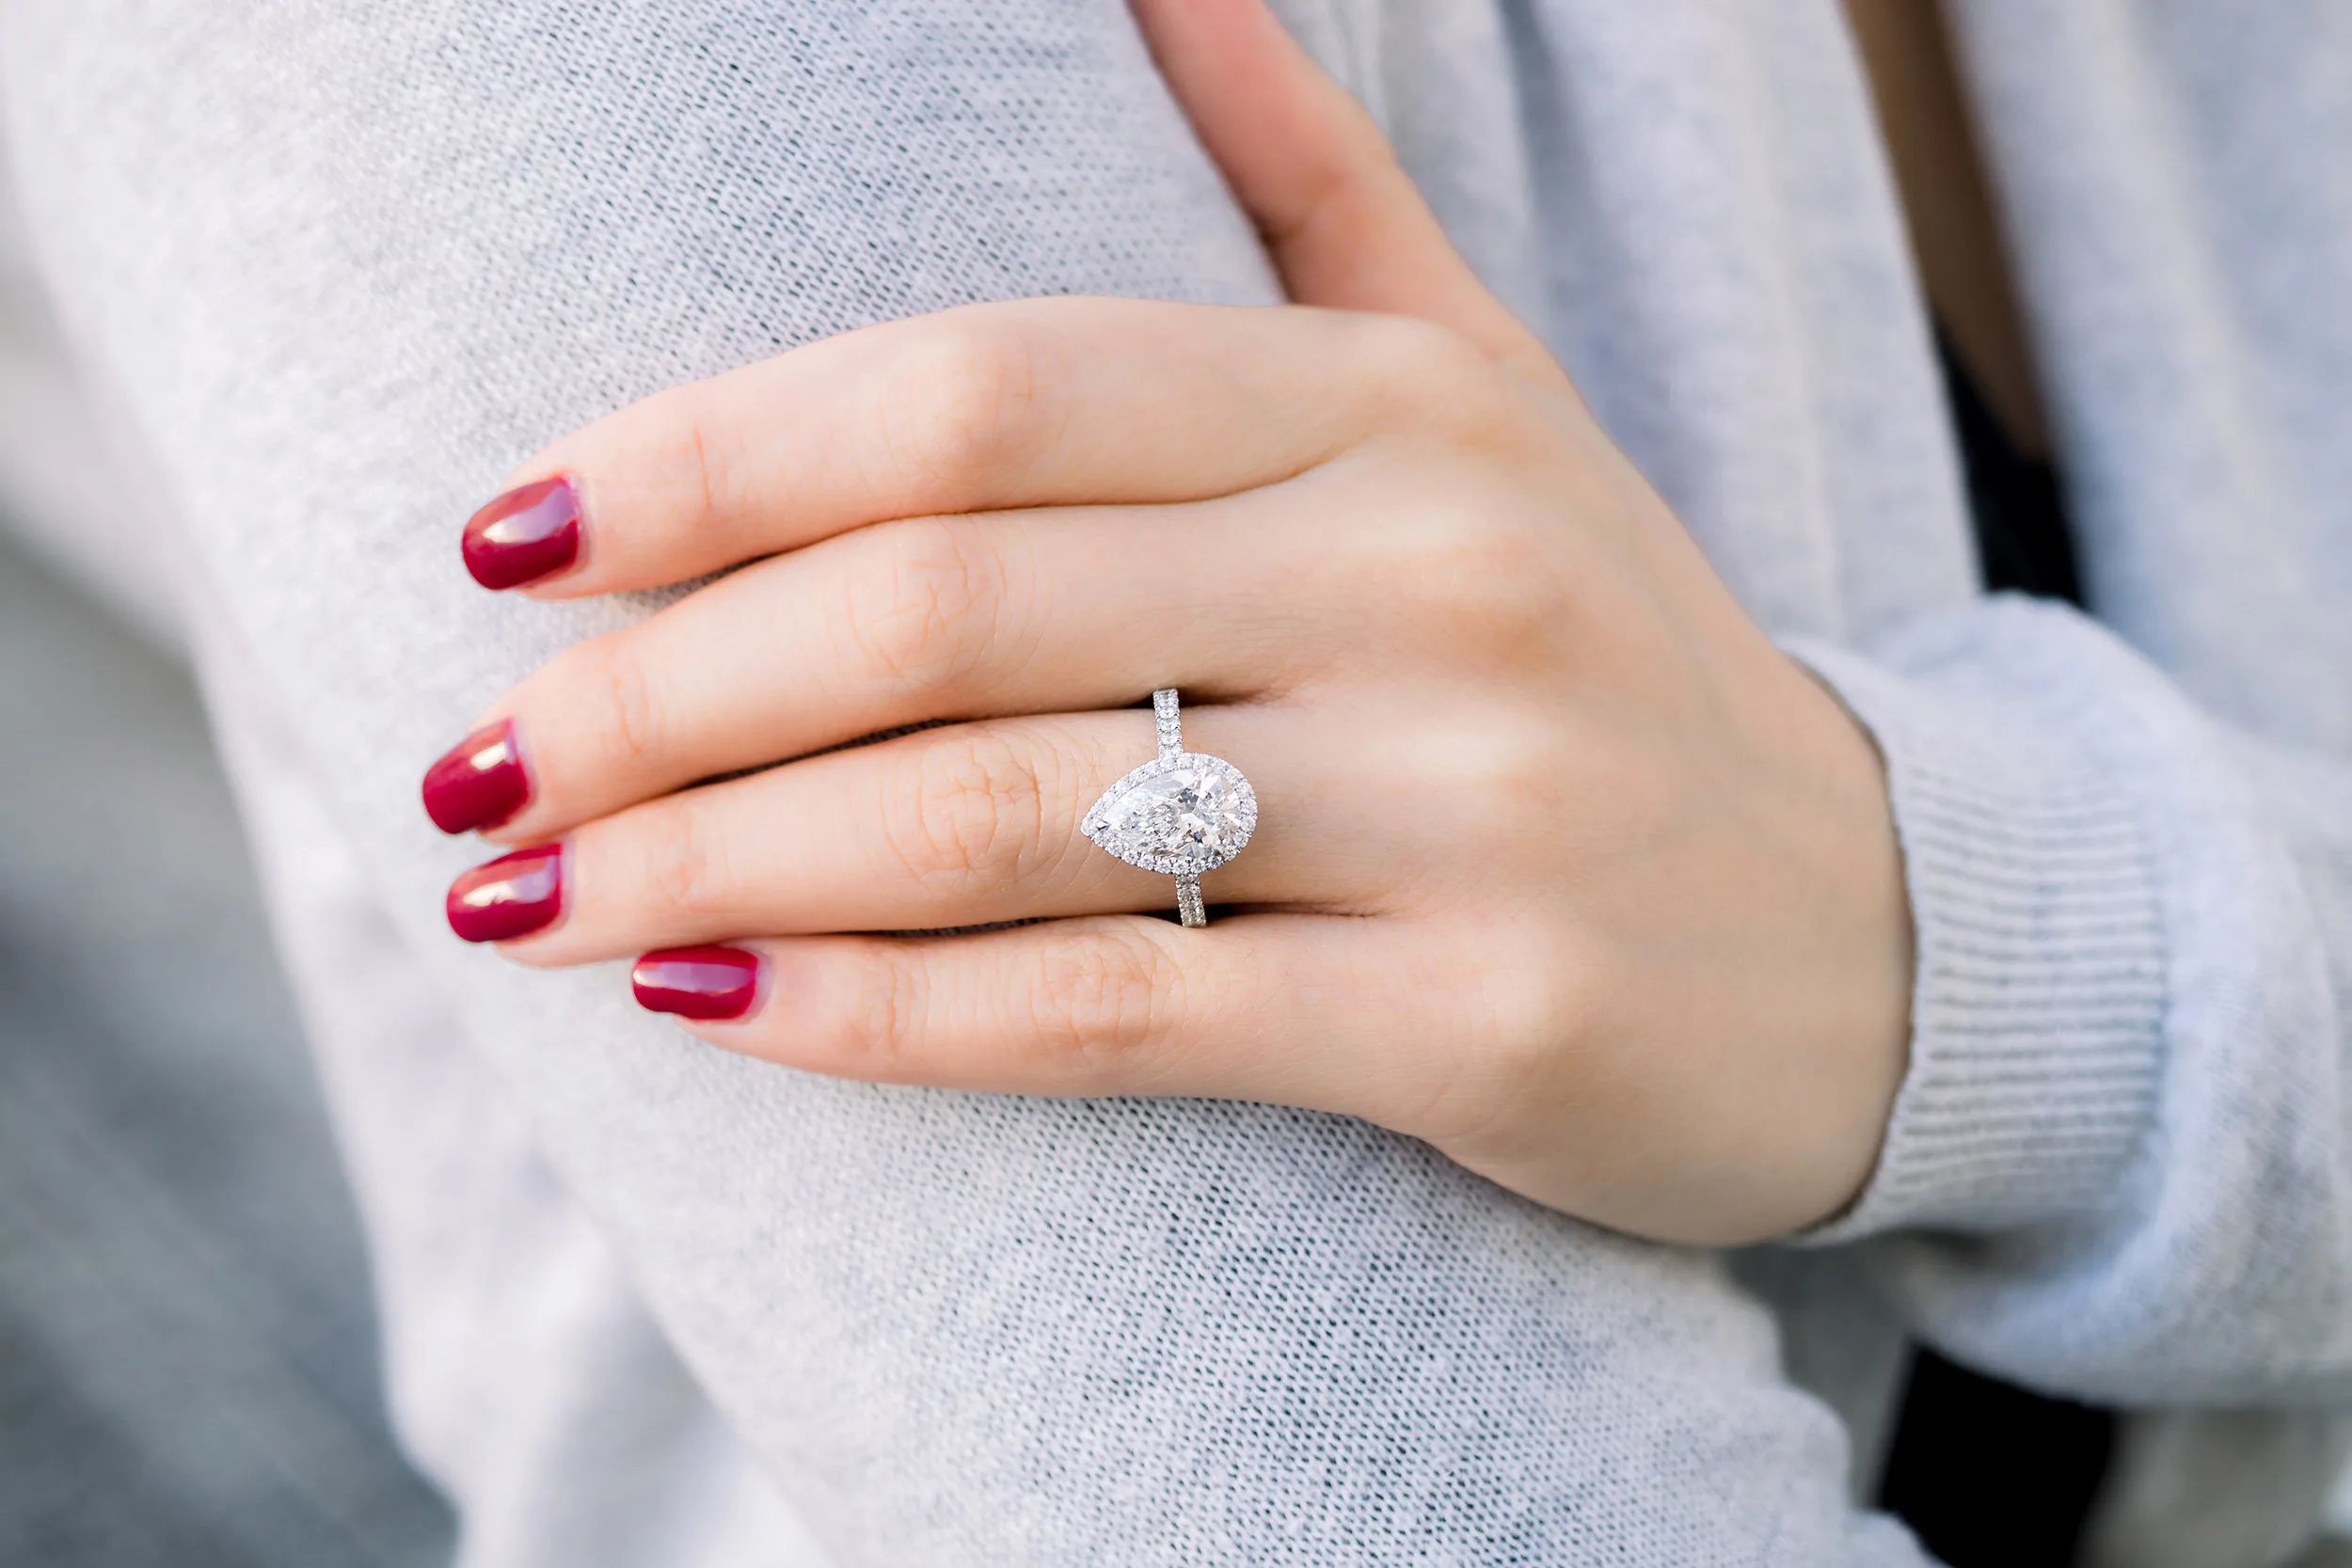 How To Choose a Good Jewelry Store for Diamond Rings? | by William Barthman  | Medium